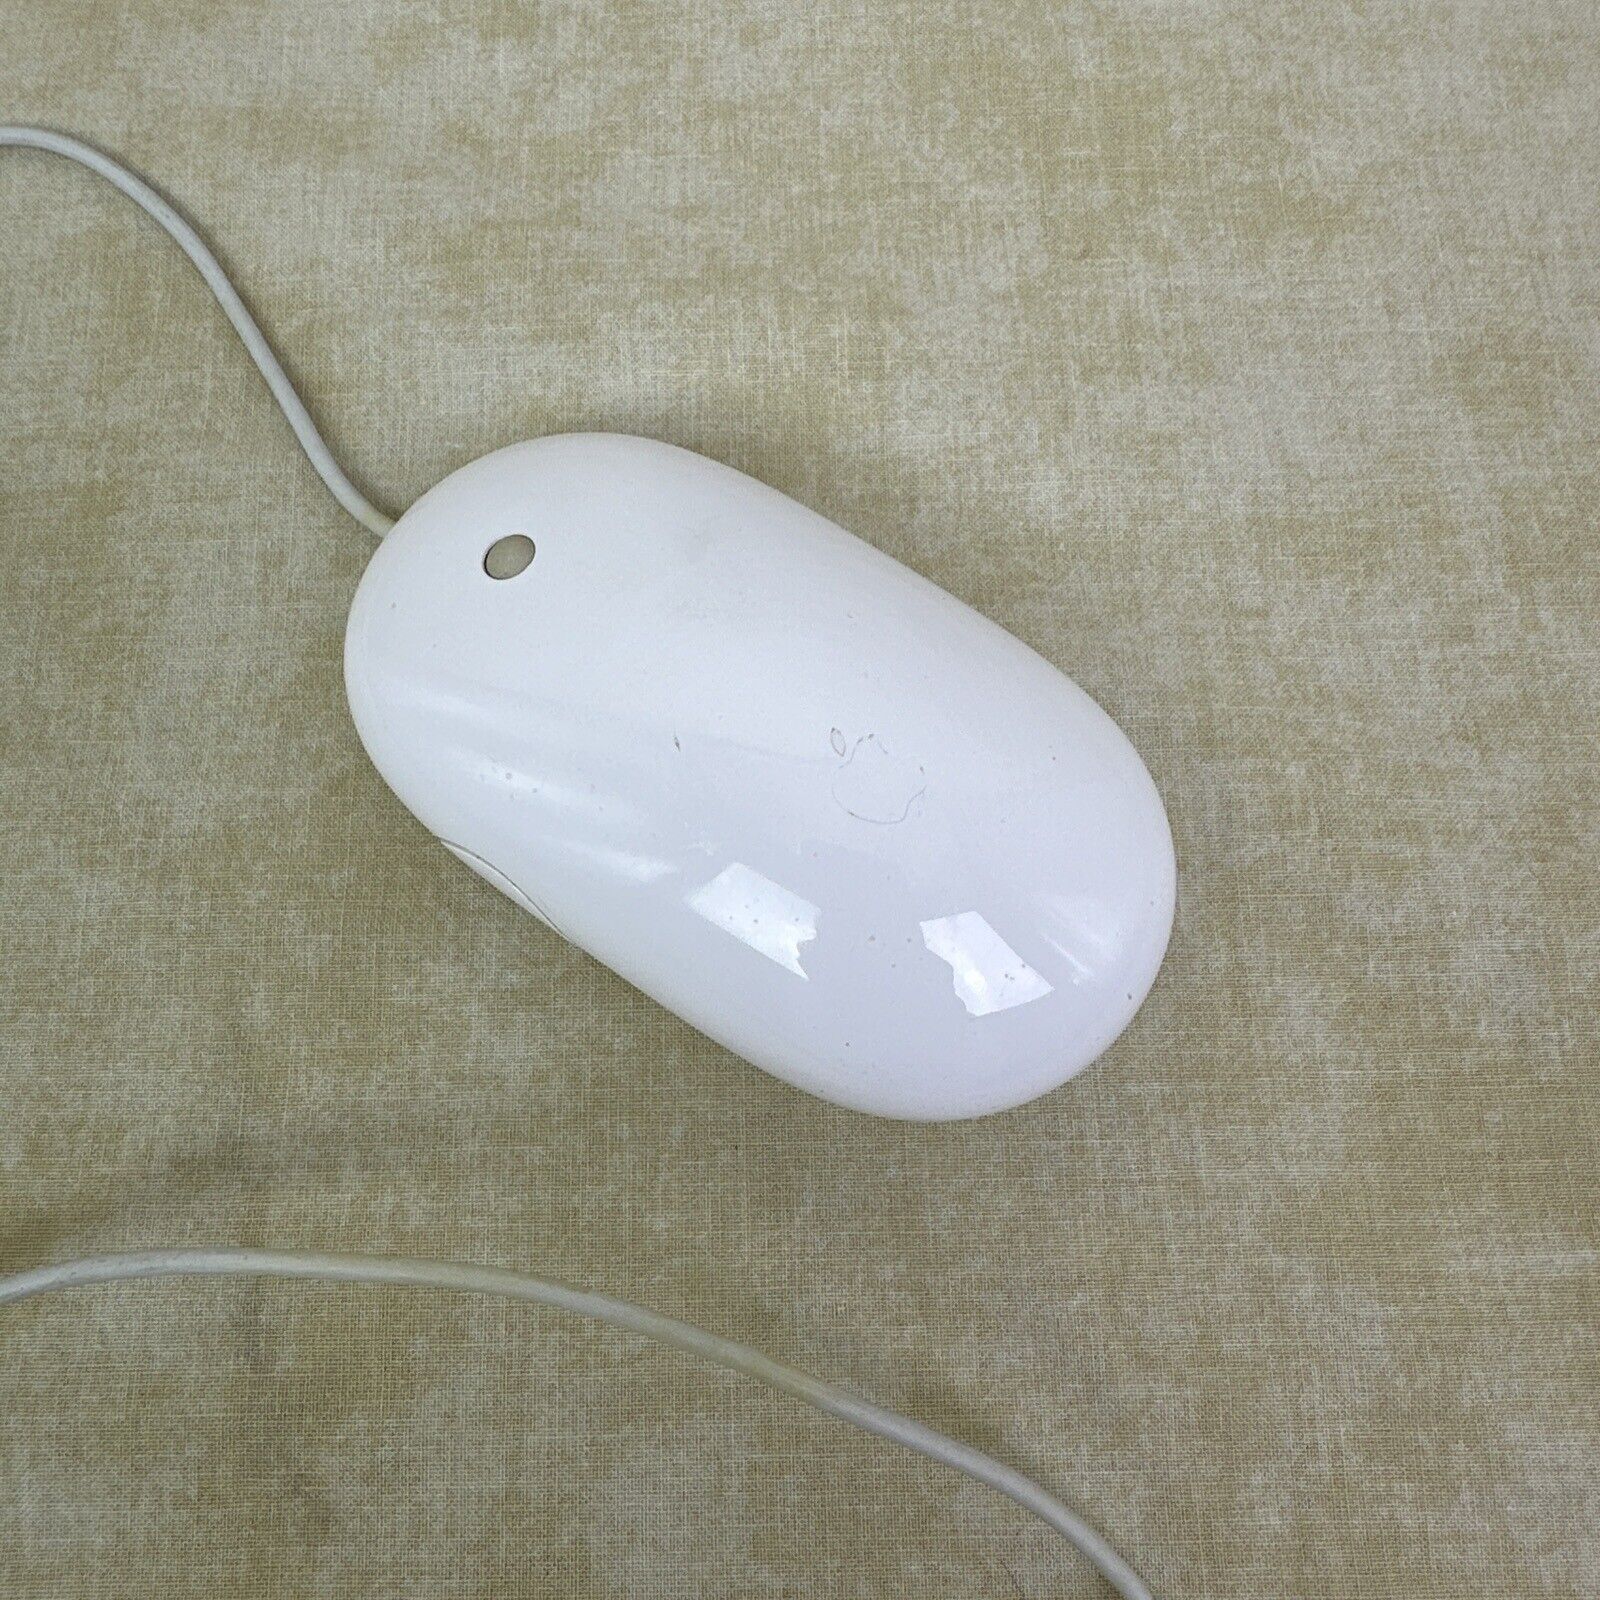 AUTHENTIC Apple USB Wired Optical Mouse Model A1152